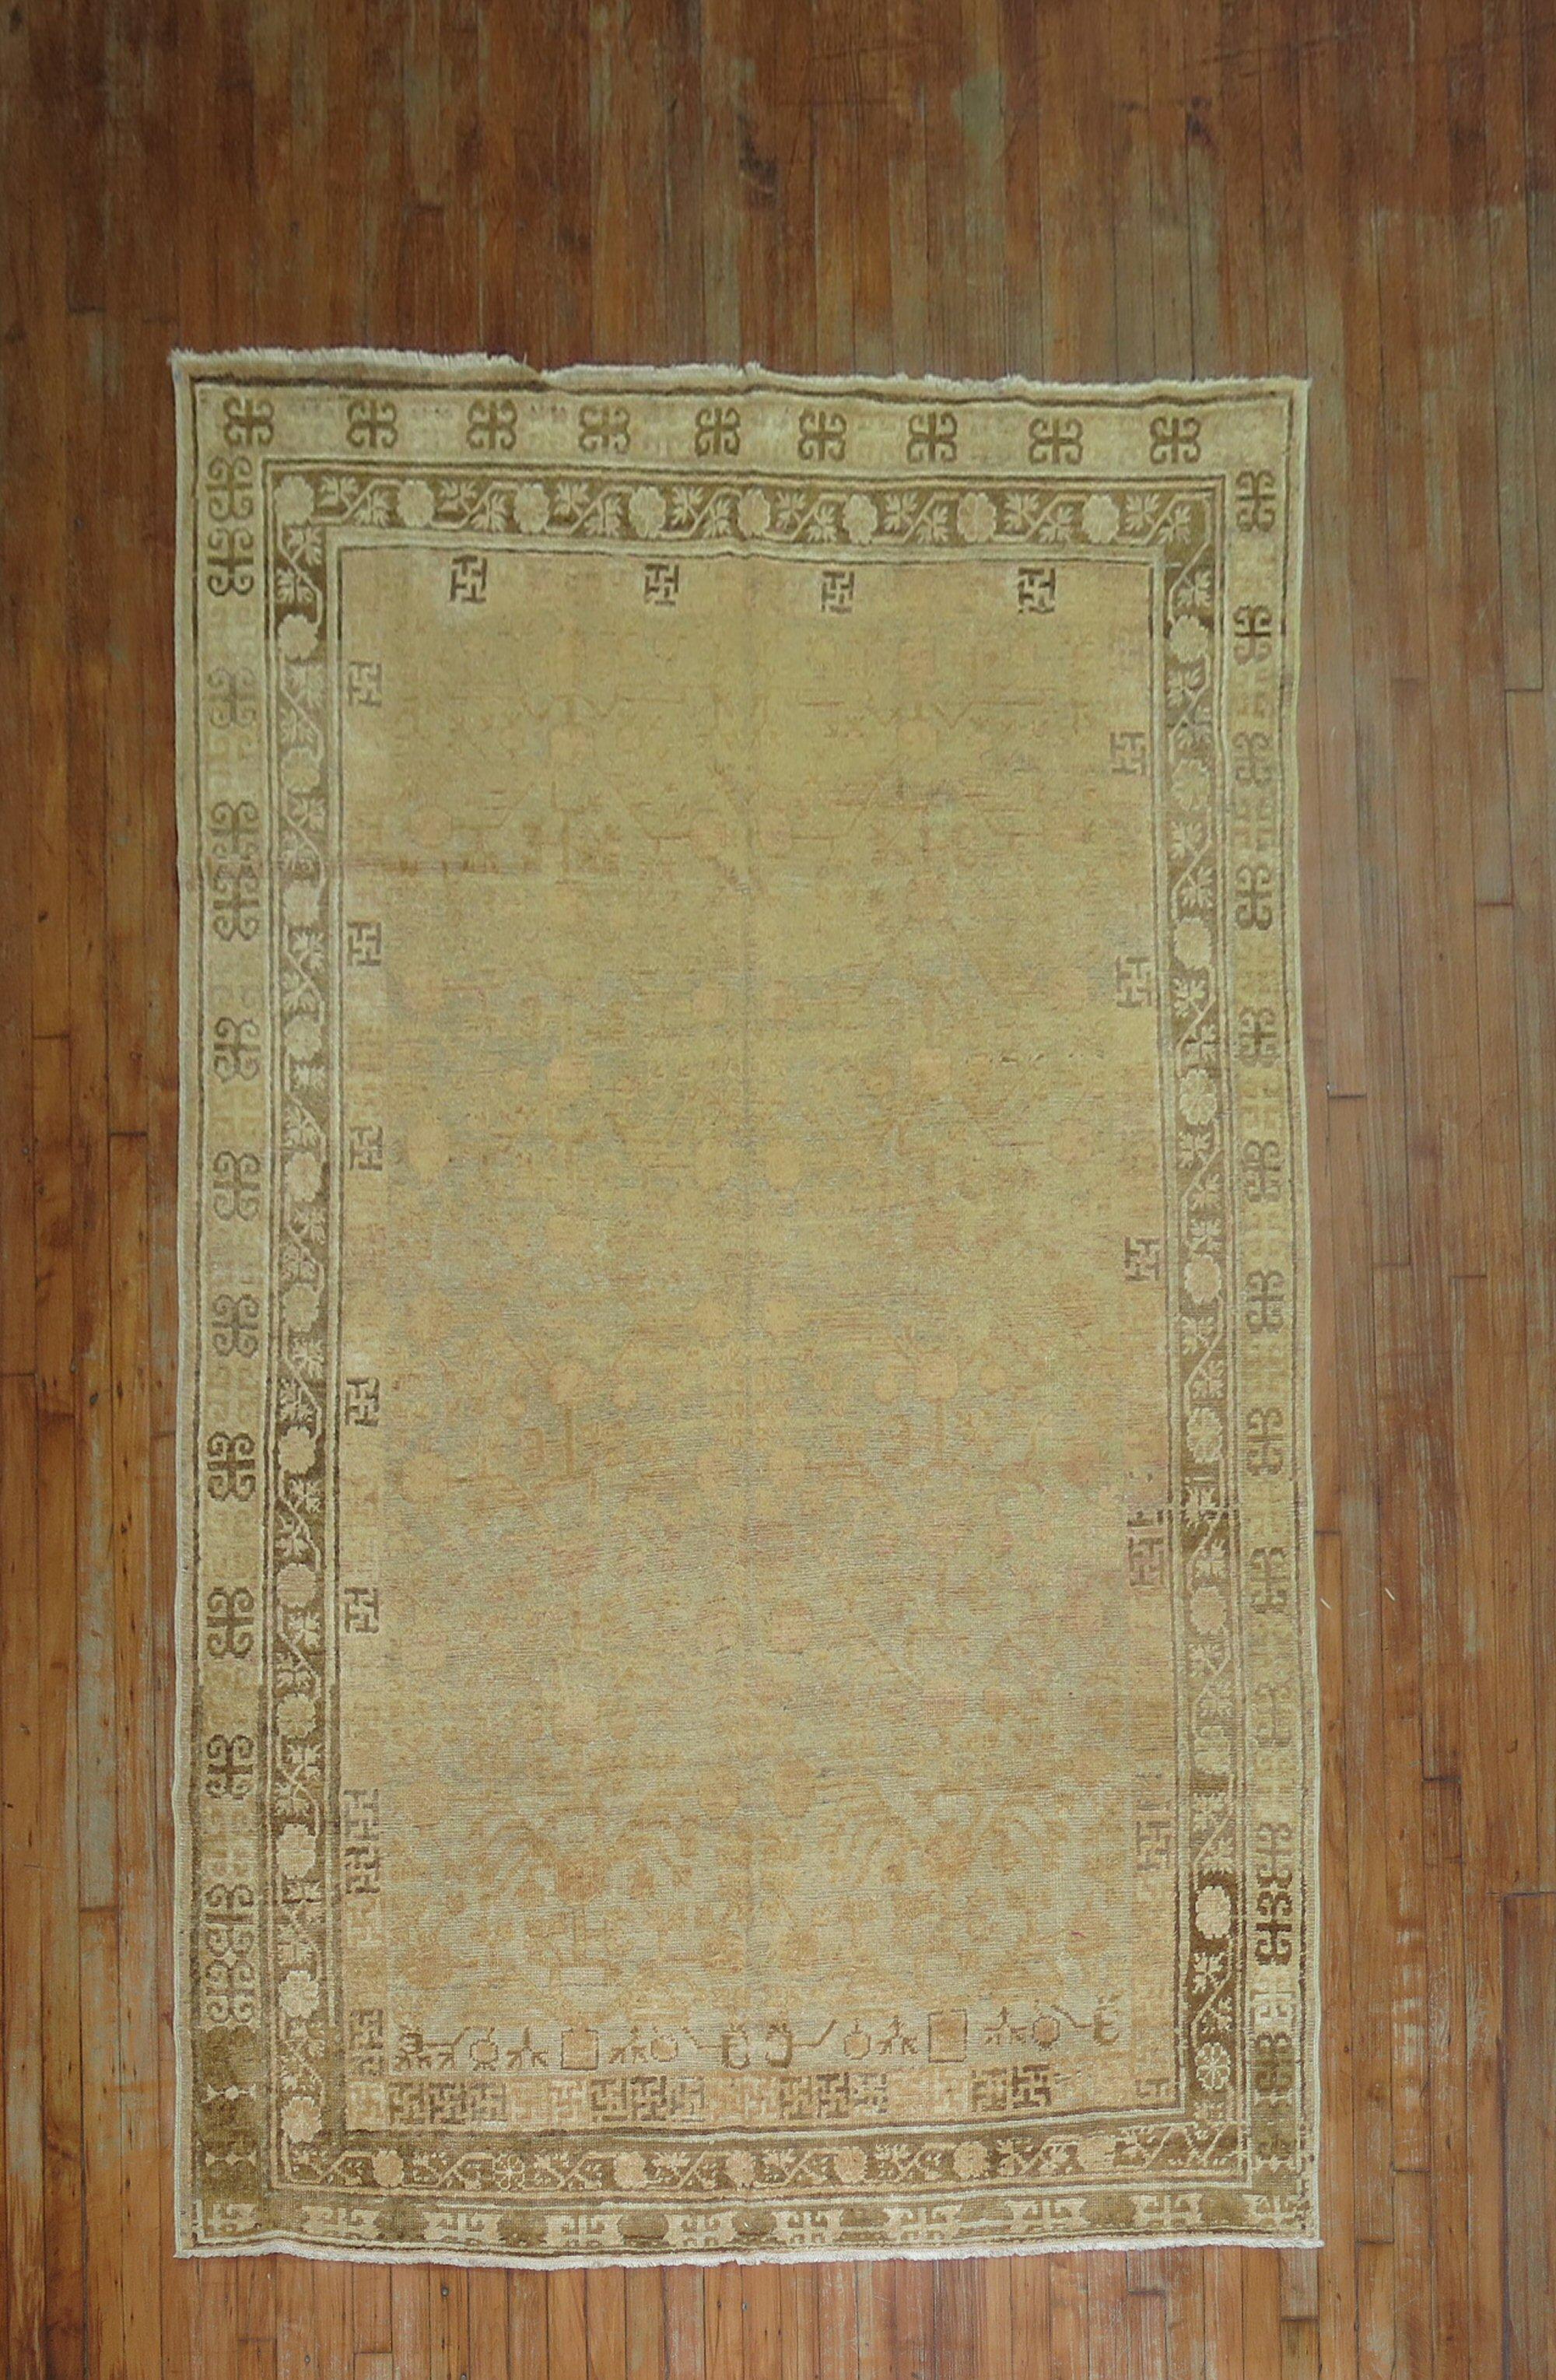 A Khotan rug woven in East Turkestan over 100 years ago with attractive subtle colors and an all-over Pomegranate Design. Includes several light natural abrashes. Very easy to decorate modern or antique furniture around this rug.